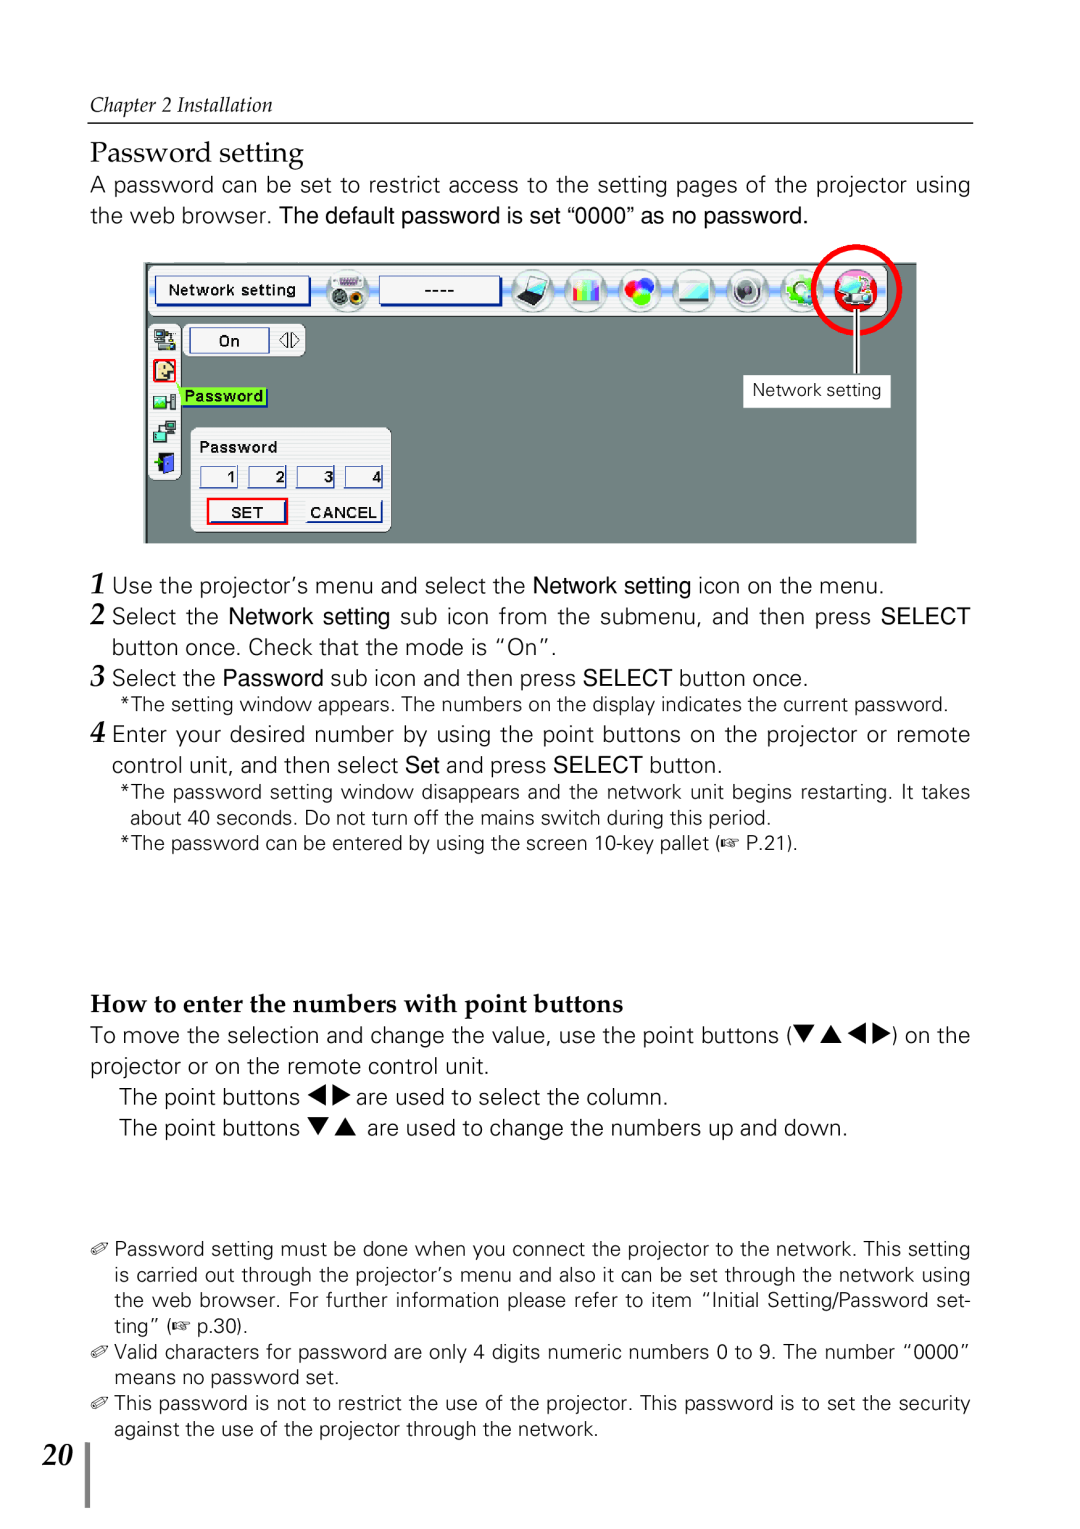 Eiki PjNET-20 owner manual Password setting, How to enter the numbers with point buttons 